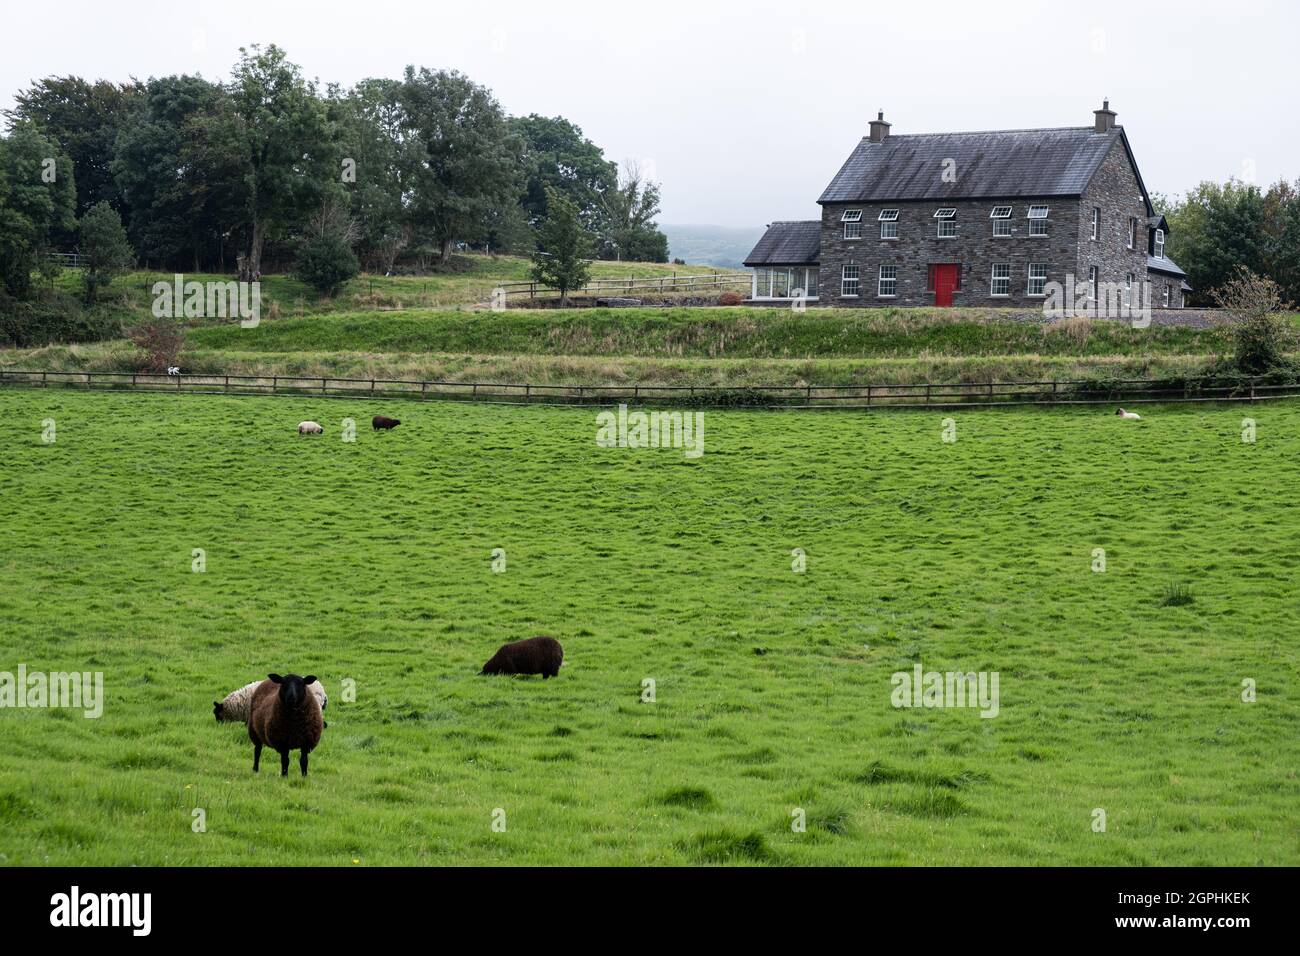 Typical irish farmhouse with green grass and domestic coat animals. Ireland Europe Stock Photo